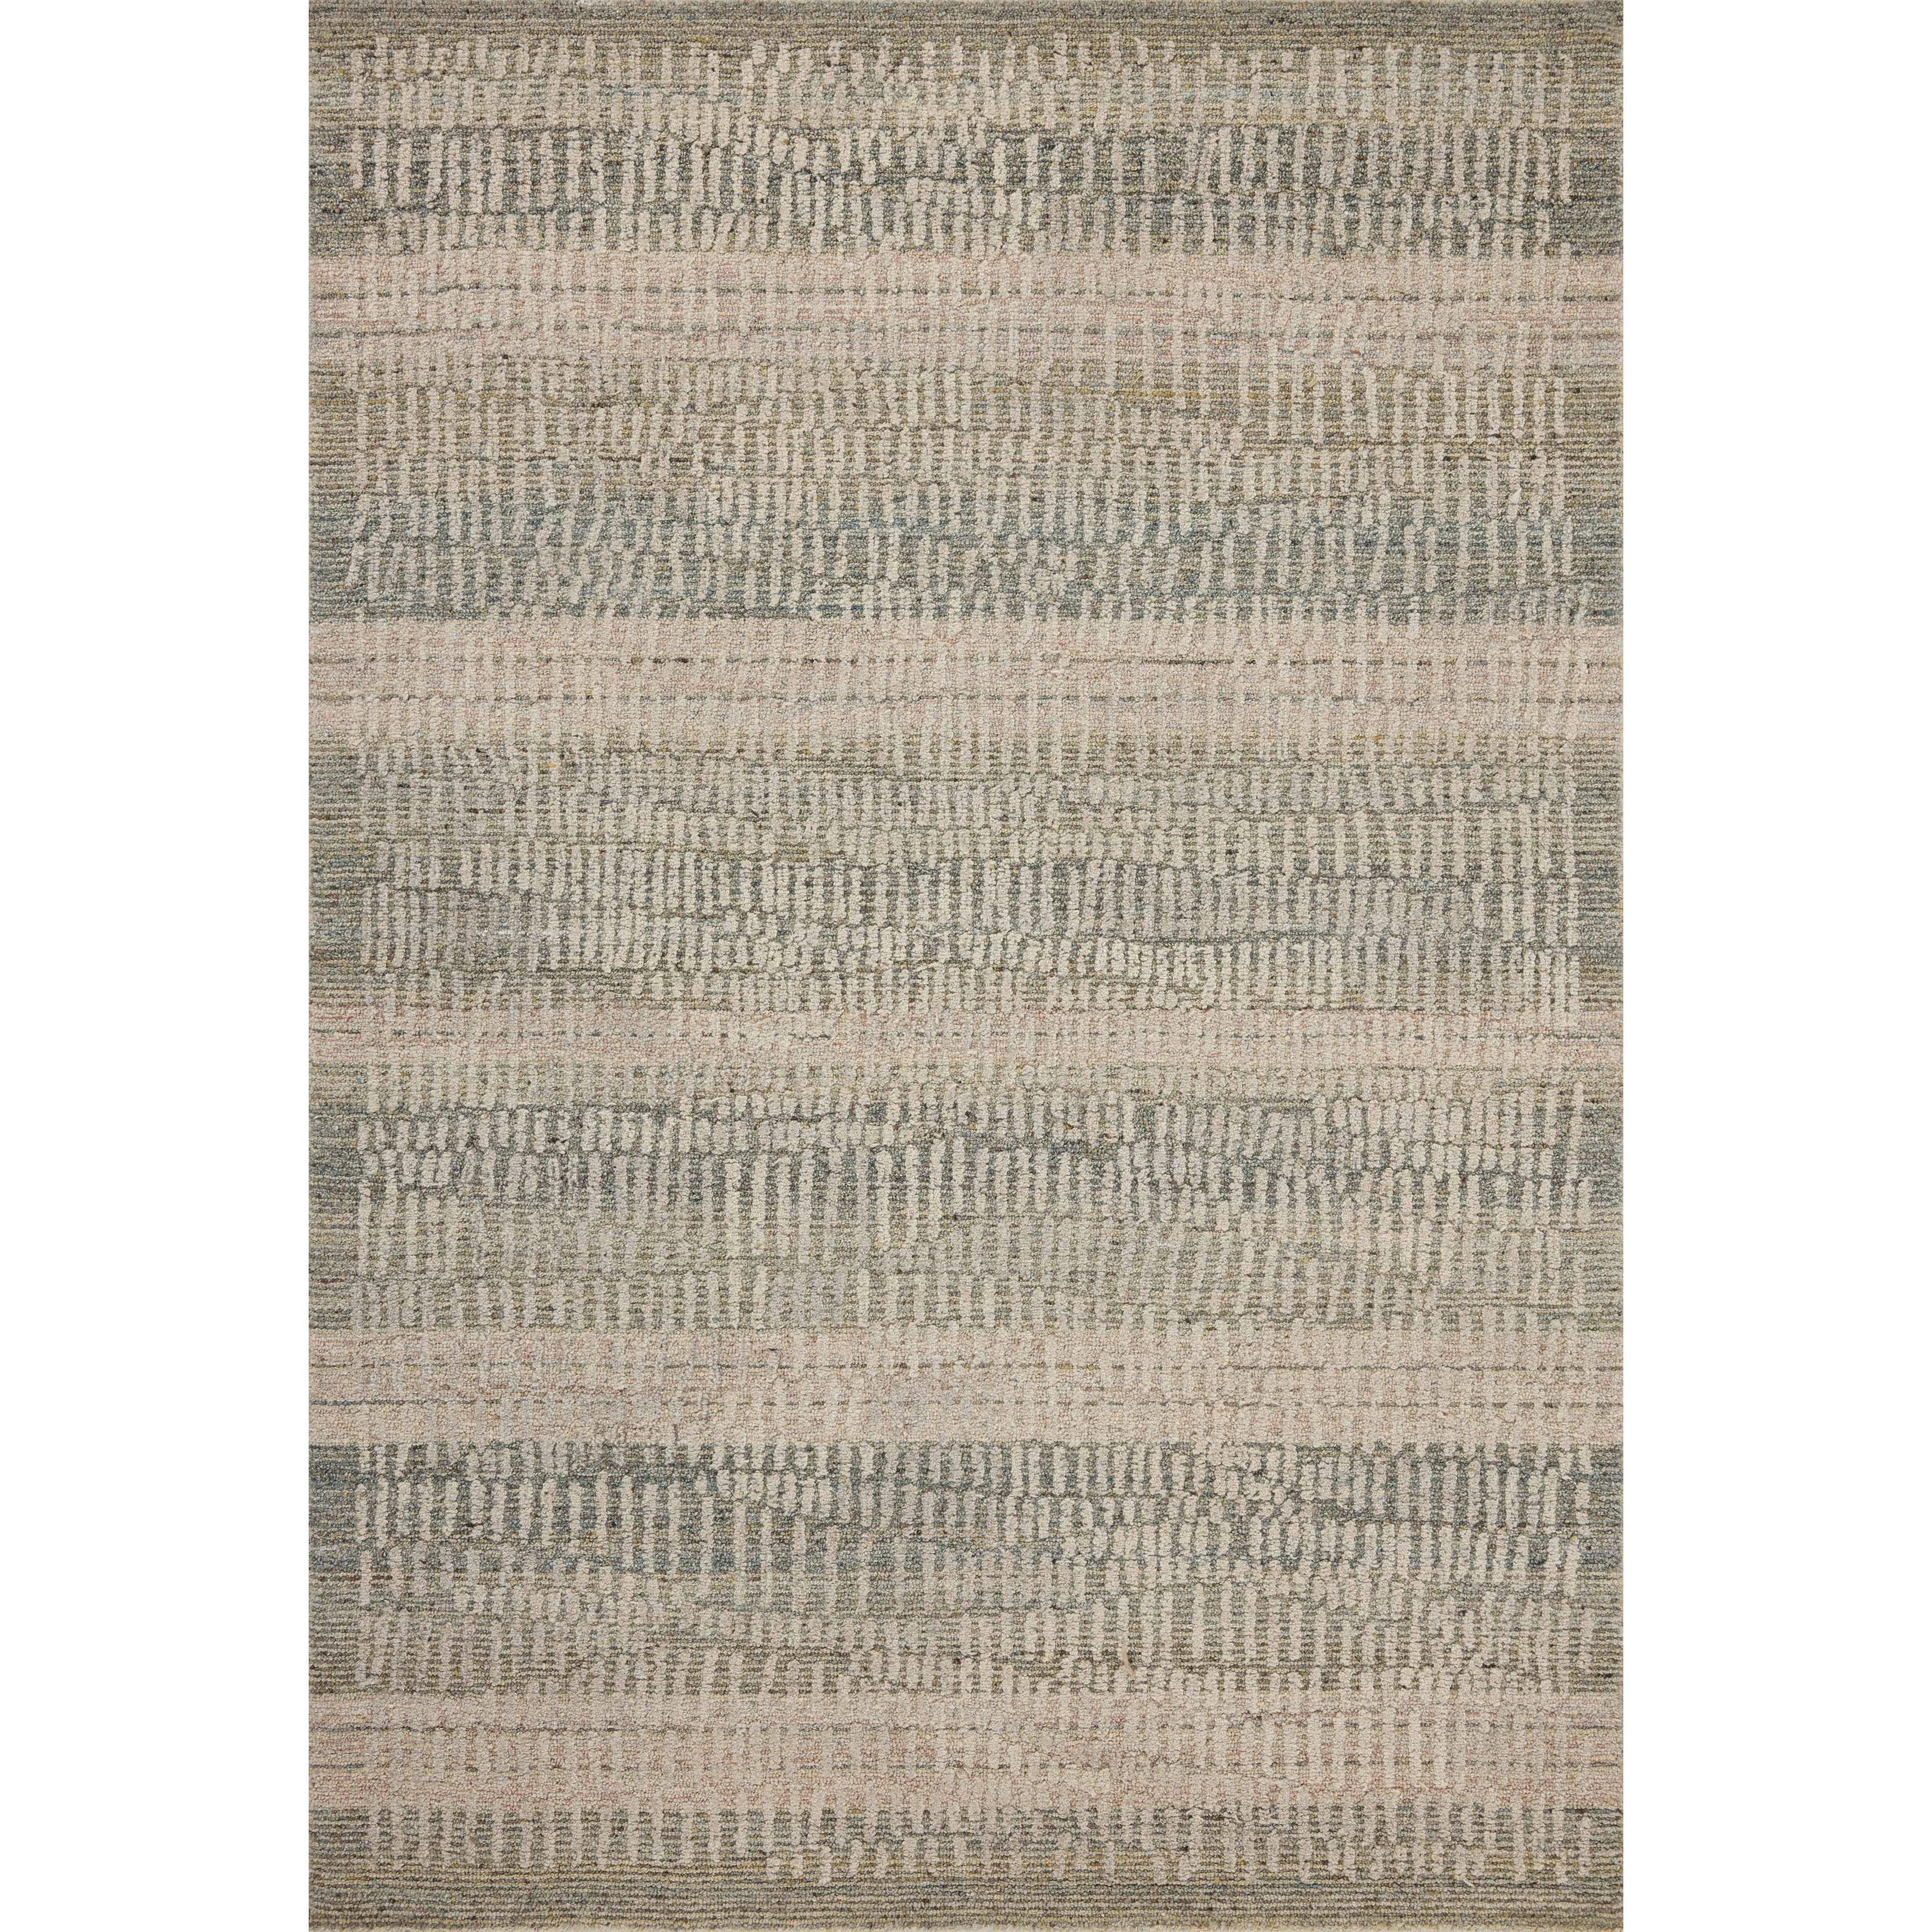 The Elias Earth / Blush Rug is a hand-tufted wool area rug with lively graphic patterns in earth and stone tones. There’s a unique texture to the rug made by over-tufting, in which a design is hand-tufted over a tufted base, creating a subtle high-low pile. Amethyst Home provides interior design, new home construction design consulting, vintage area rugs, and lighting in the Park City metro area.